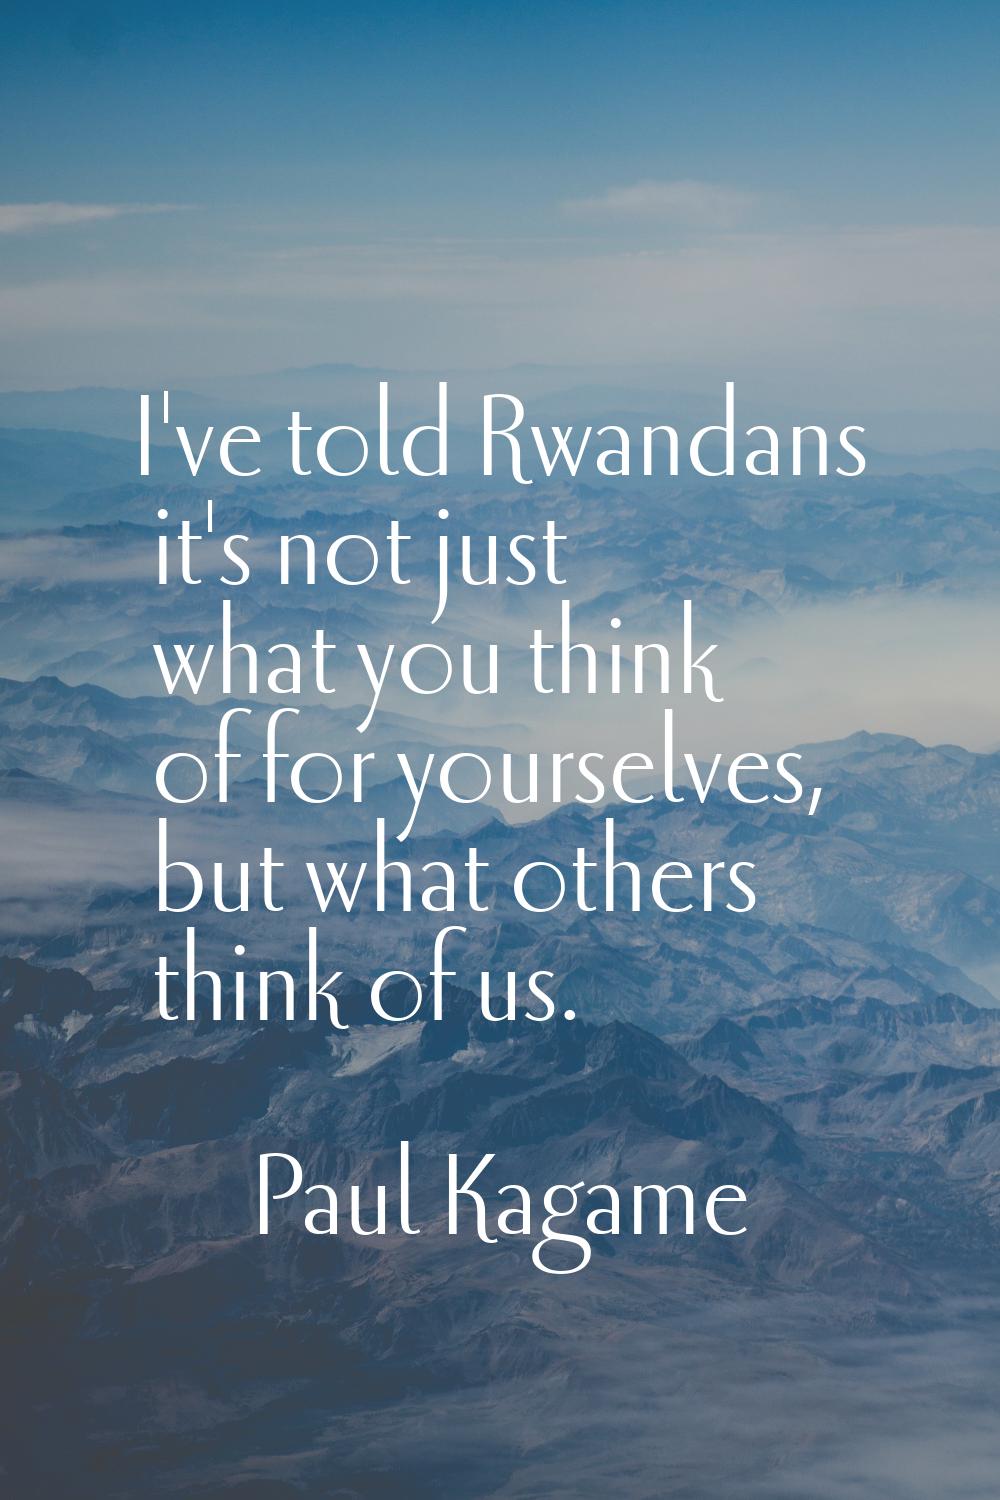 I've told Rwandans it's not just what you think of for yourselves, but what others think of us.